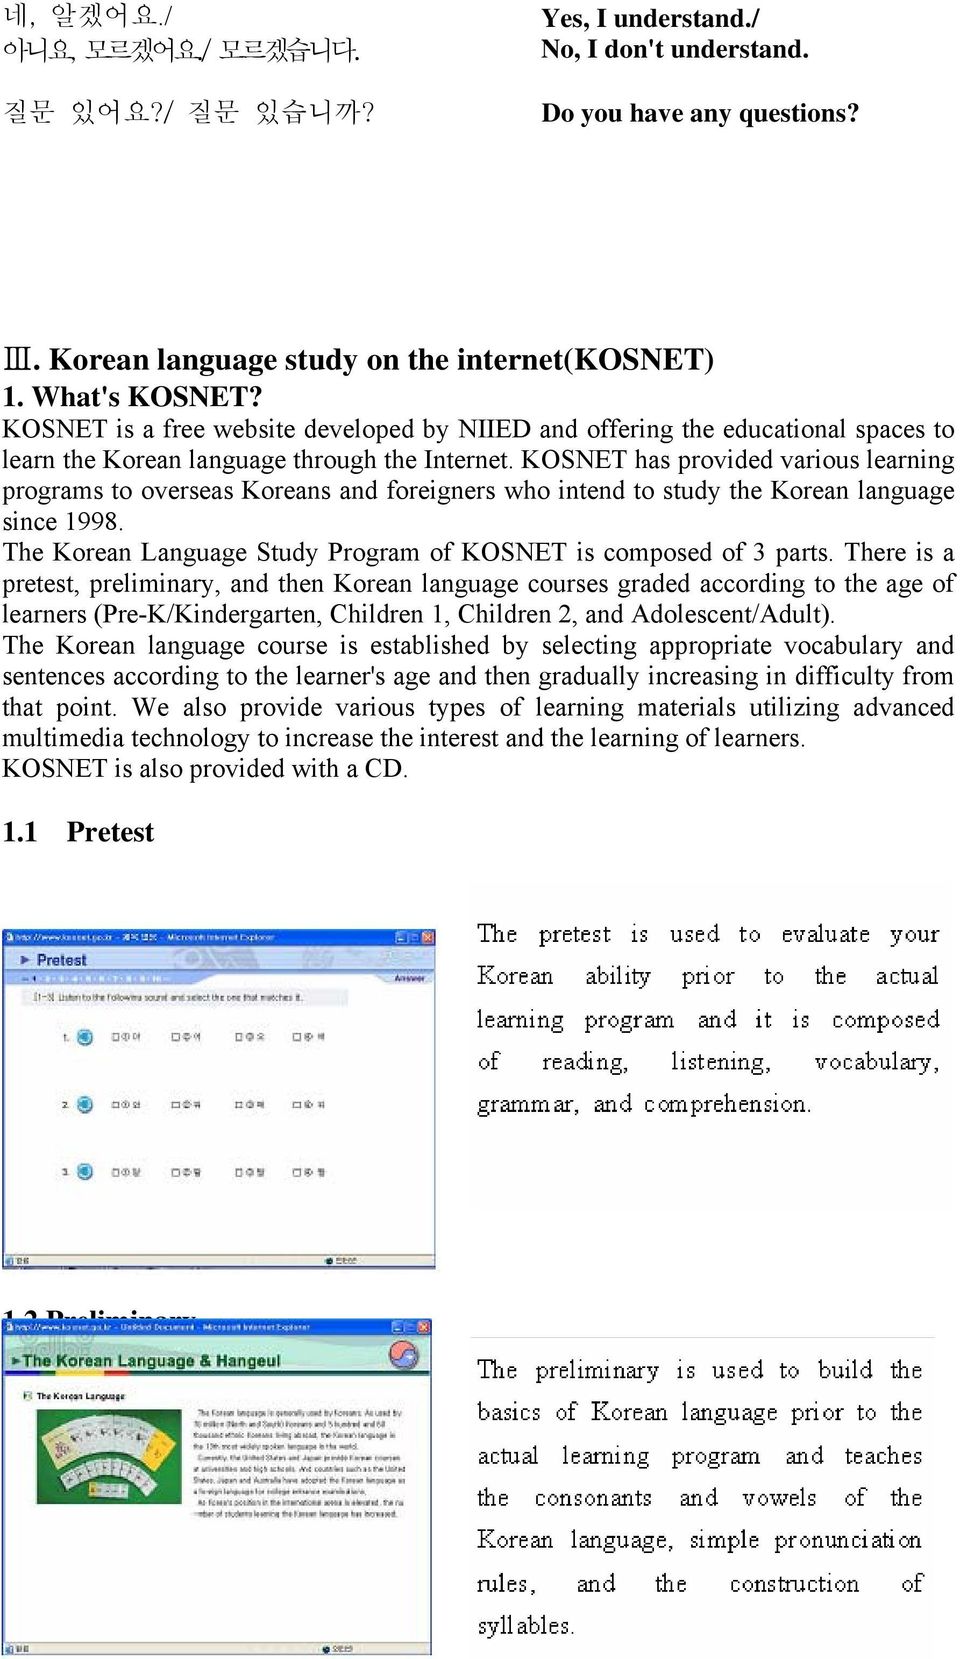 KOSNET has provided various learning programs to overseas Koreans and foreigners who intend to study the Korean language since 1998. The Korean Language Study Program of KOSNET is composed of 3 parts.